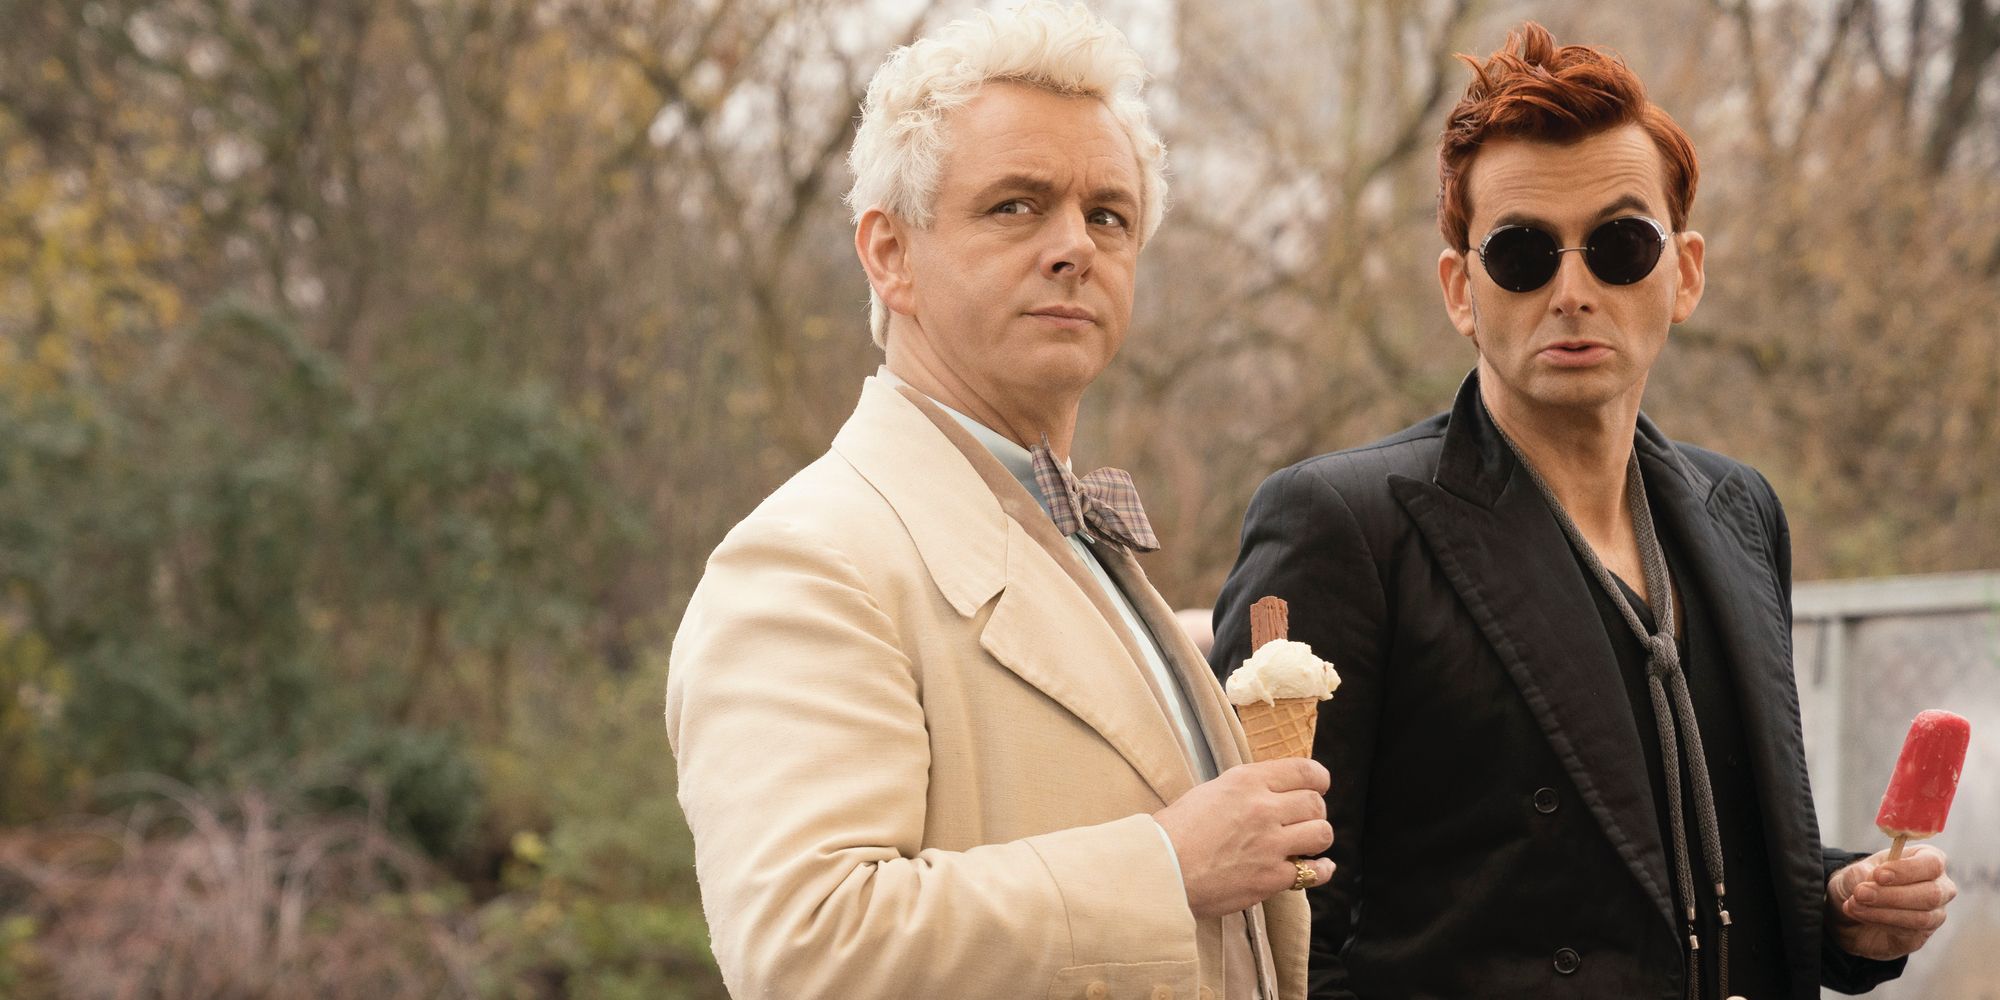 Michael Sheen and David Tennant eating ice cream in a park in Good Omens